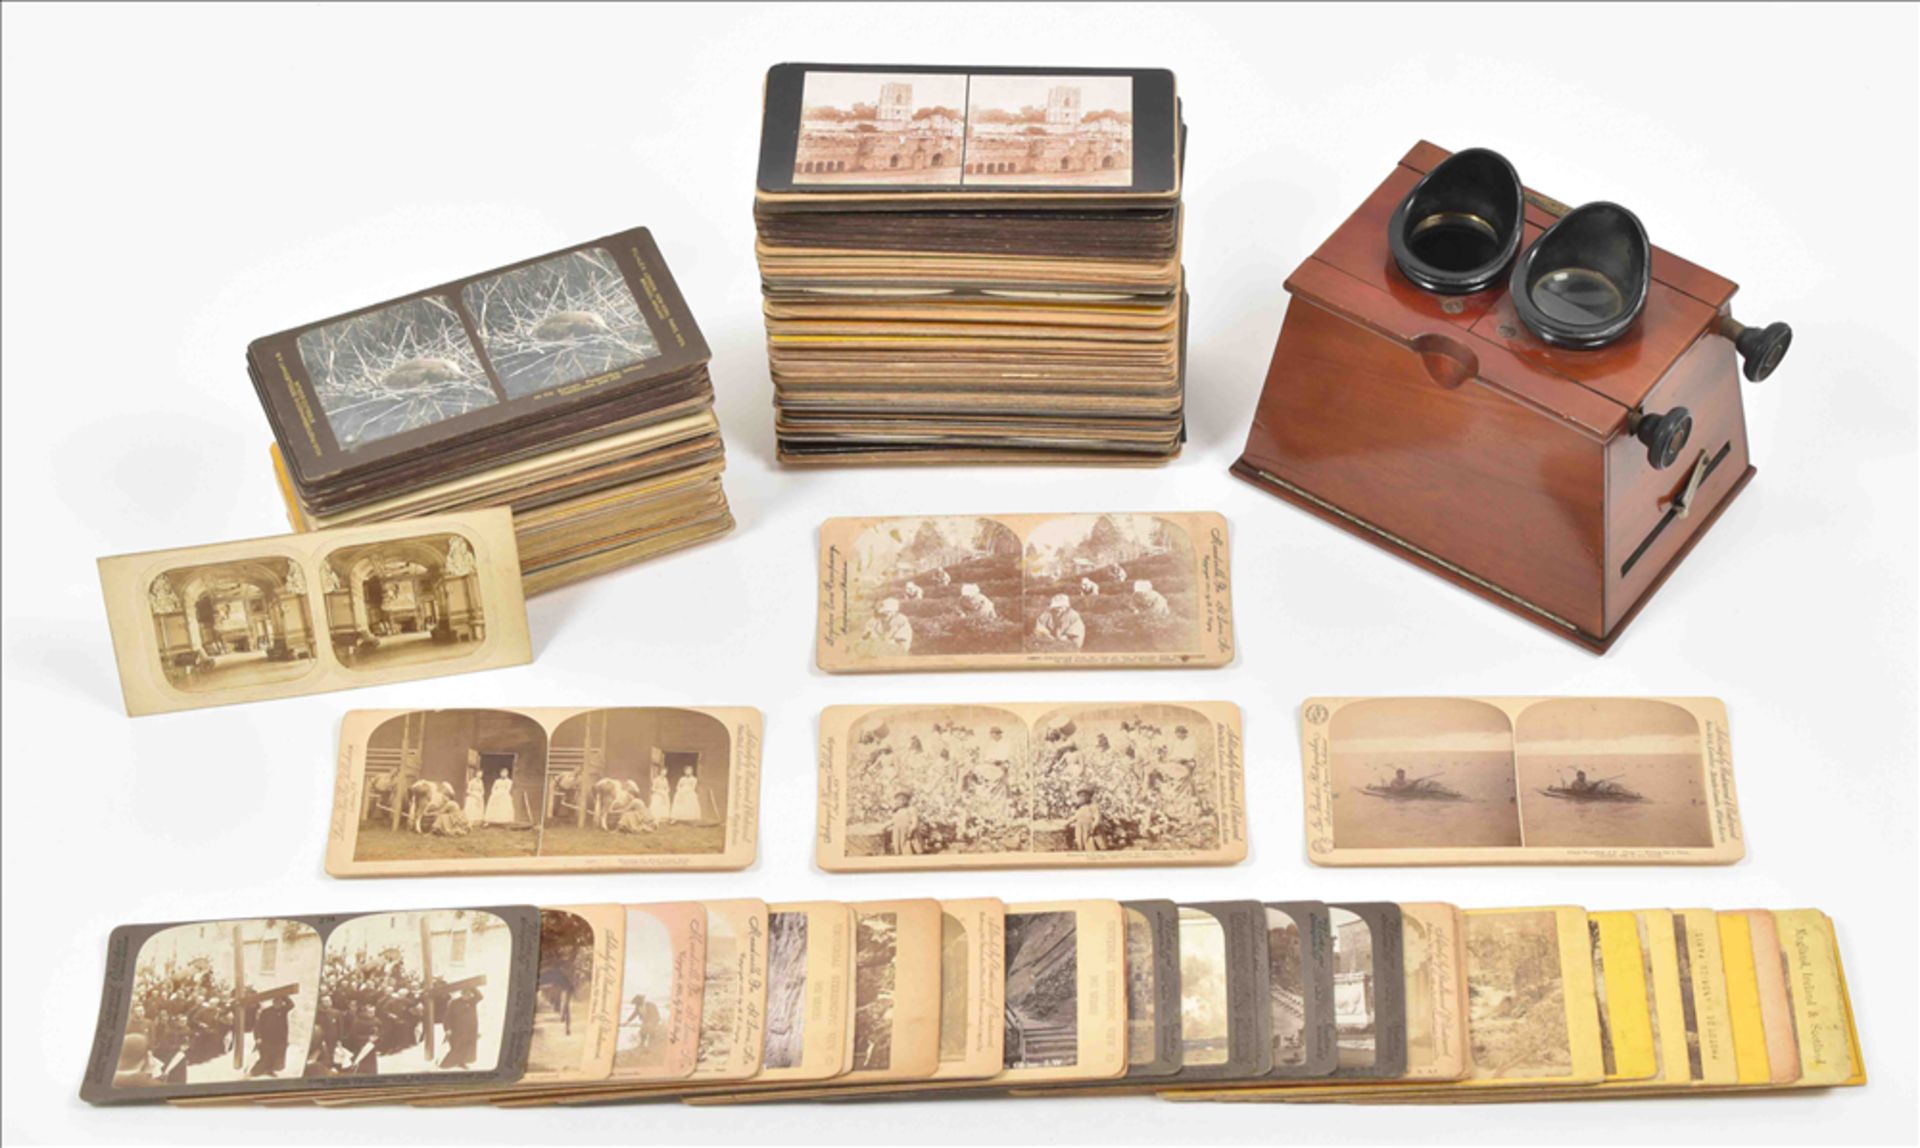 Stereoscope with approximately 250 stereograms